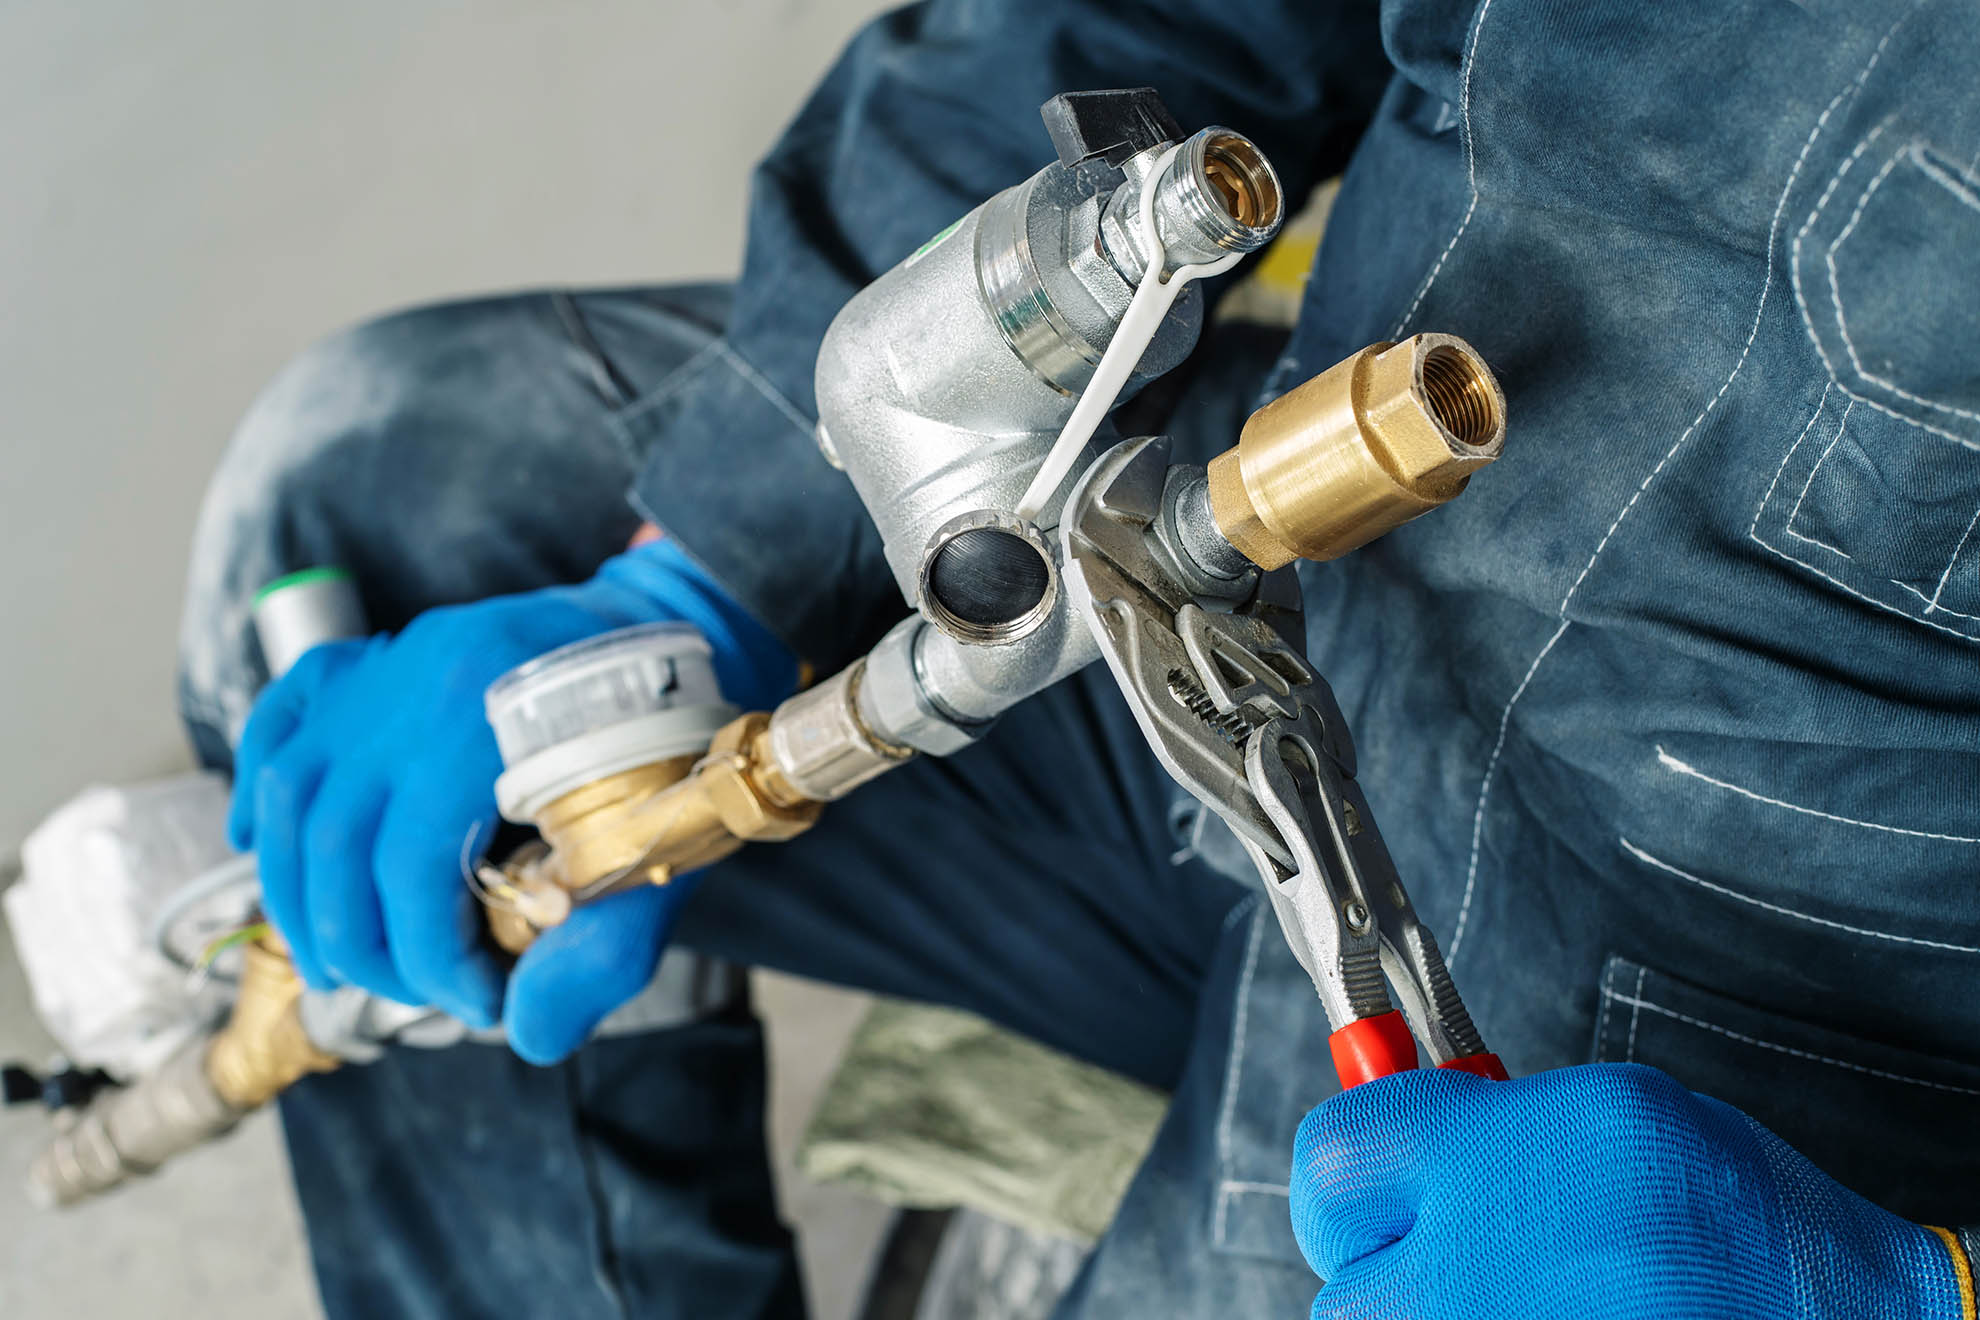 A plumber assembles a heating system using a wrench. Cropped frame. Unrecognizable person